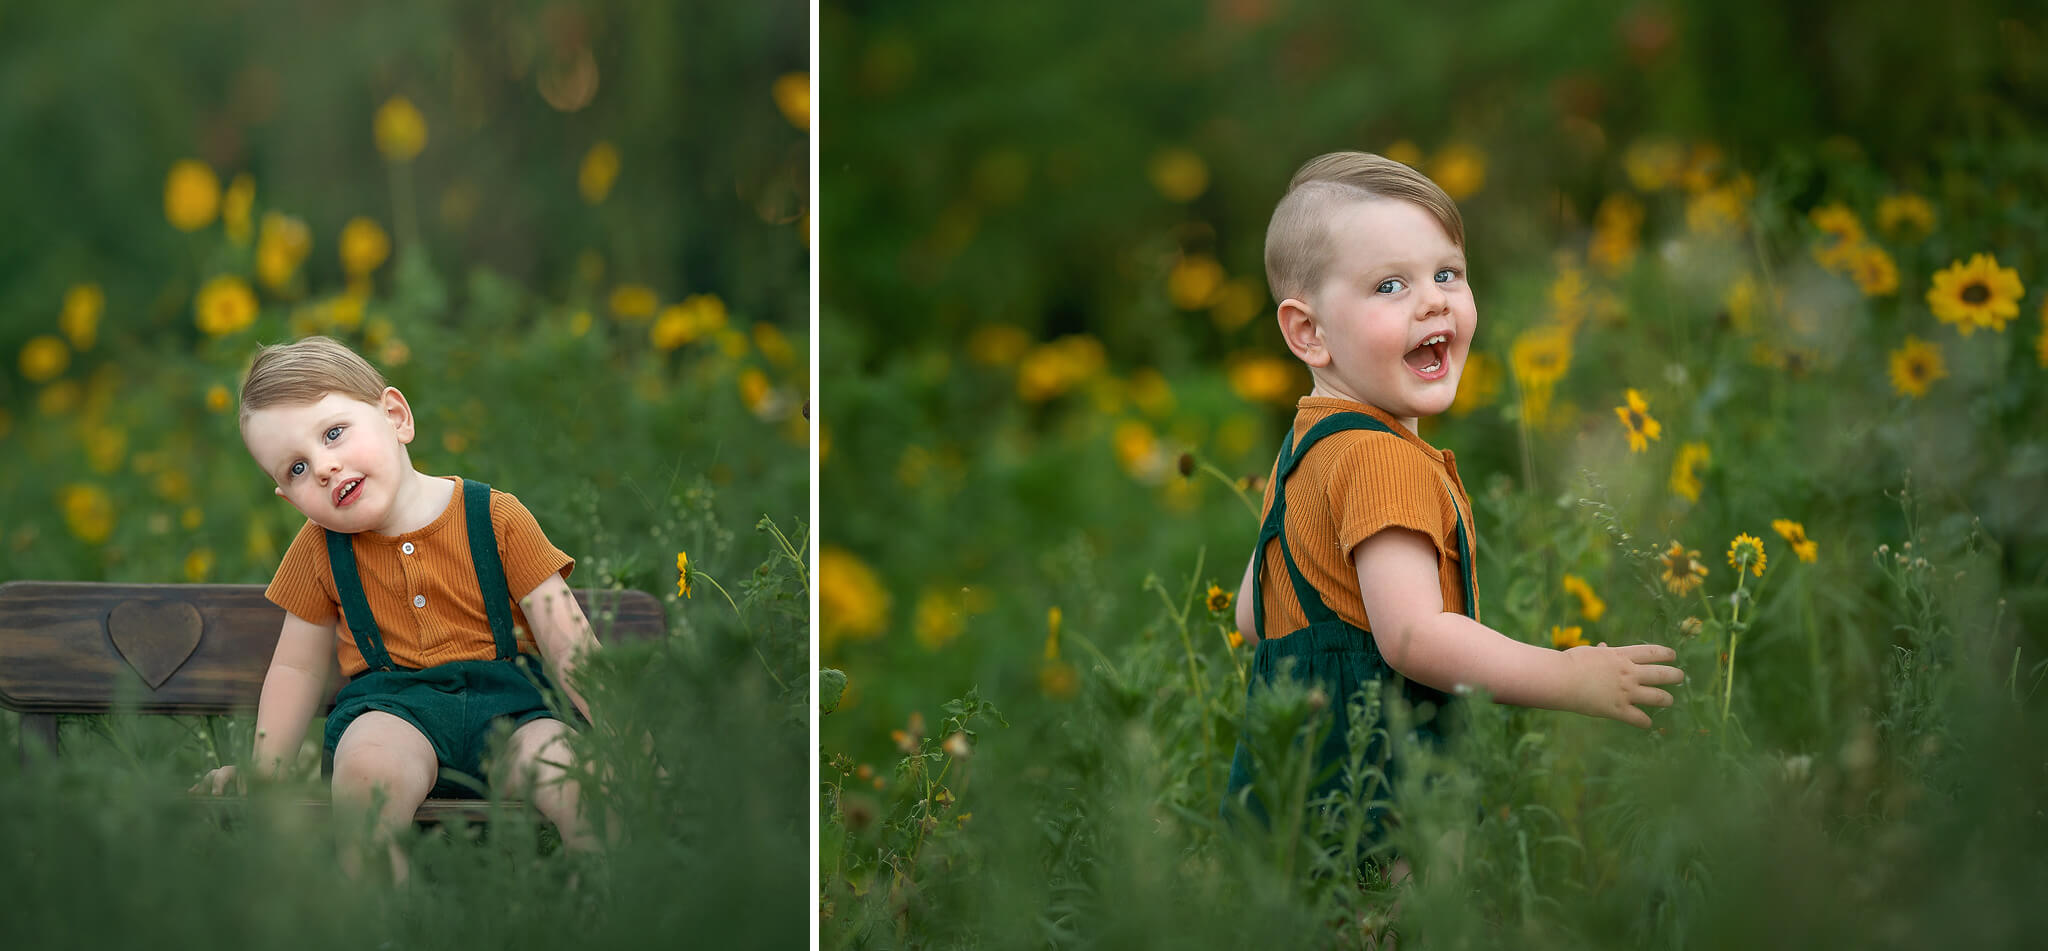 3 year old boy in a gorgeous Perth location with yellow flowers during spring photoshoot